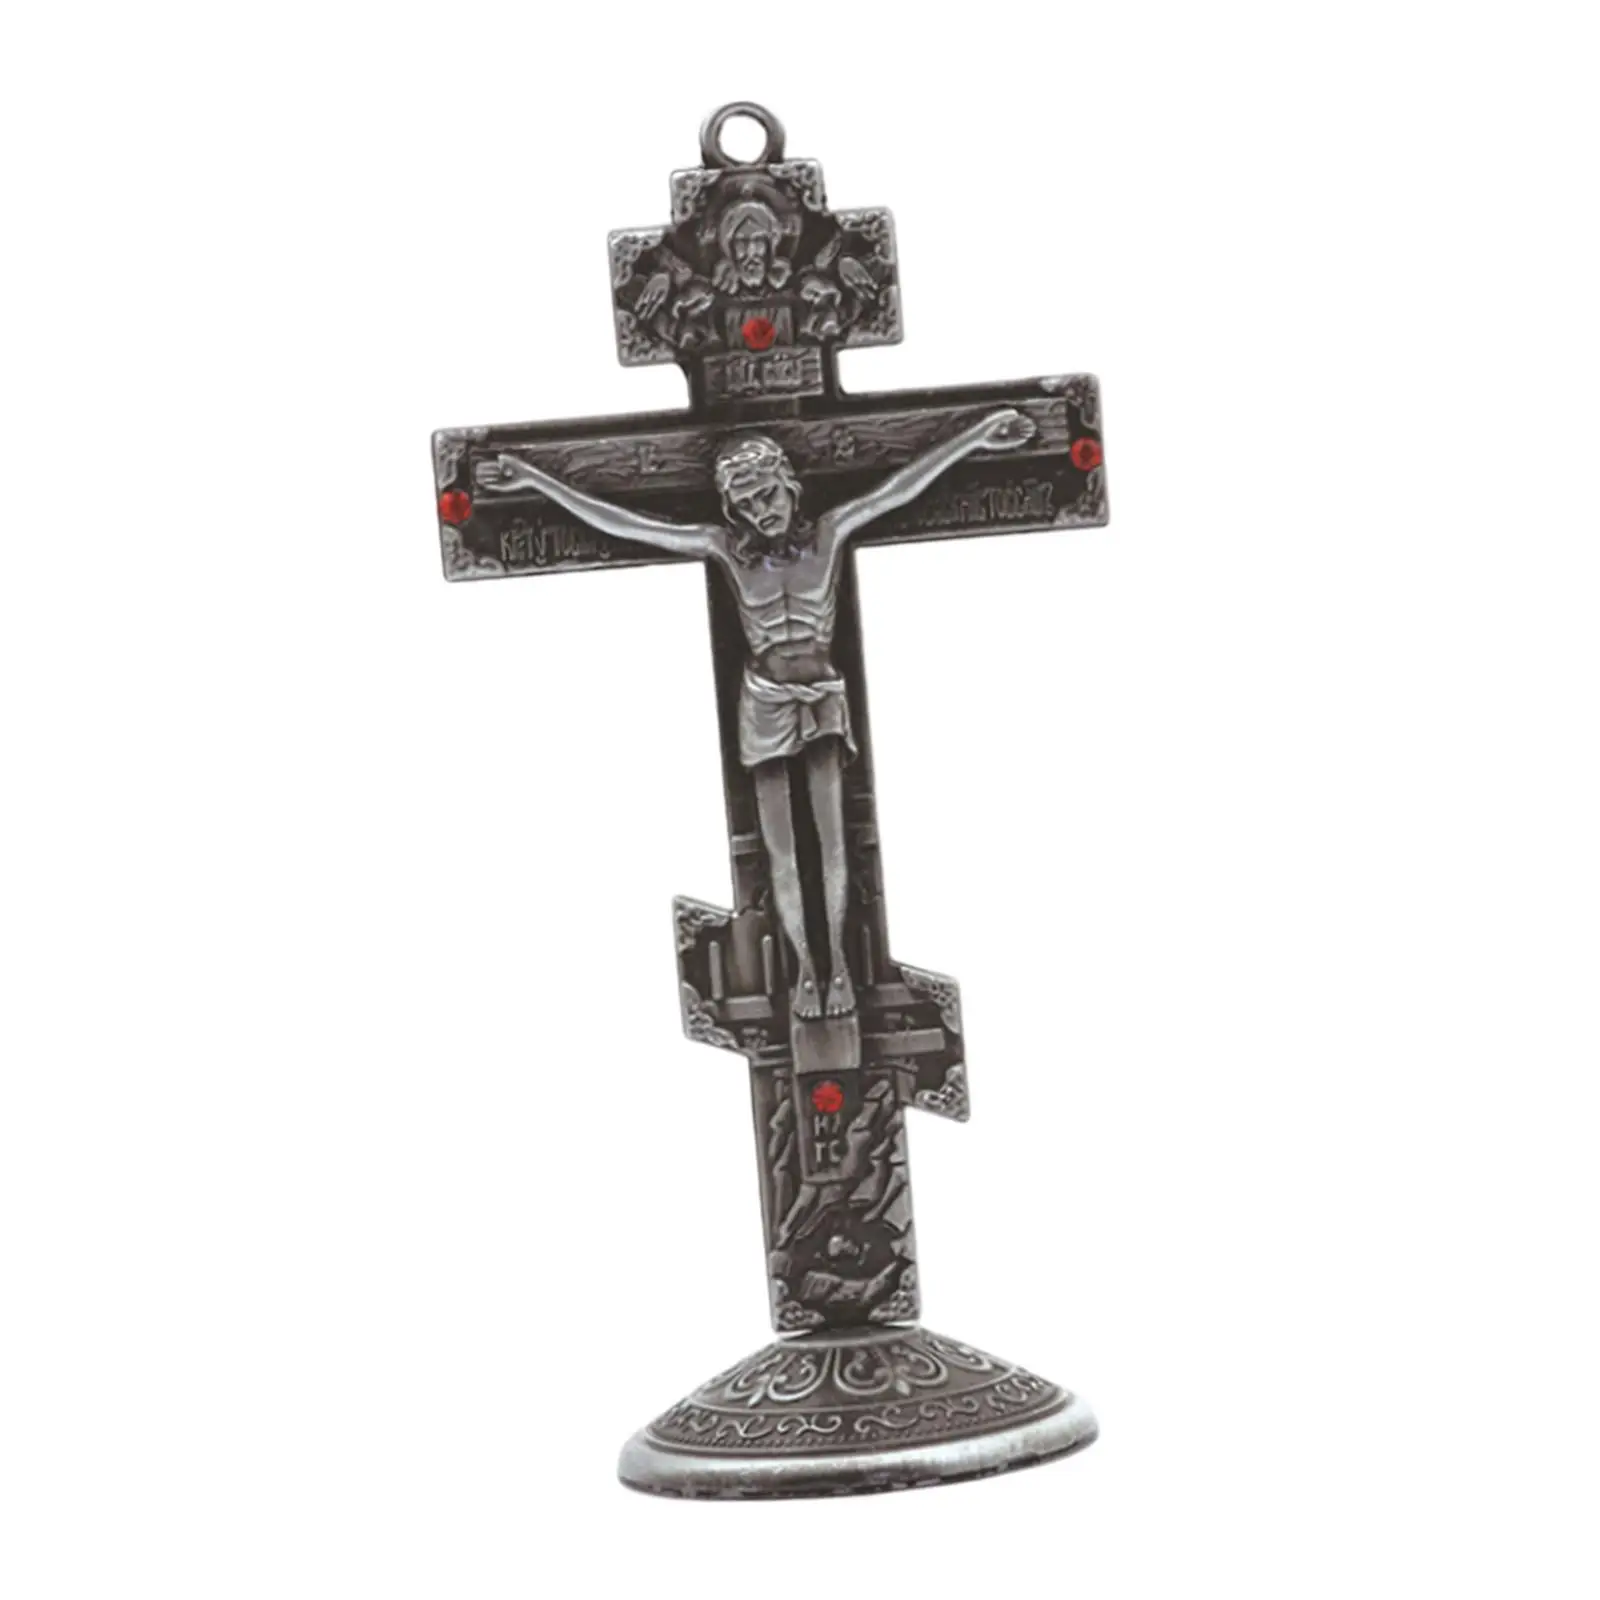 Religious Crucifix Decor Sculpture Wall Crucifix Cross Catholic Gifts Crucifix Table Cross for Home Office Tabletop Decor